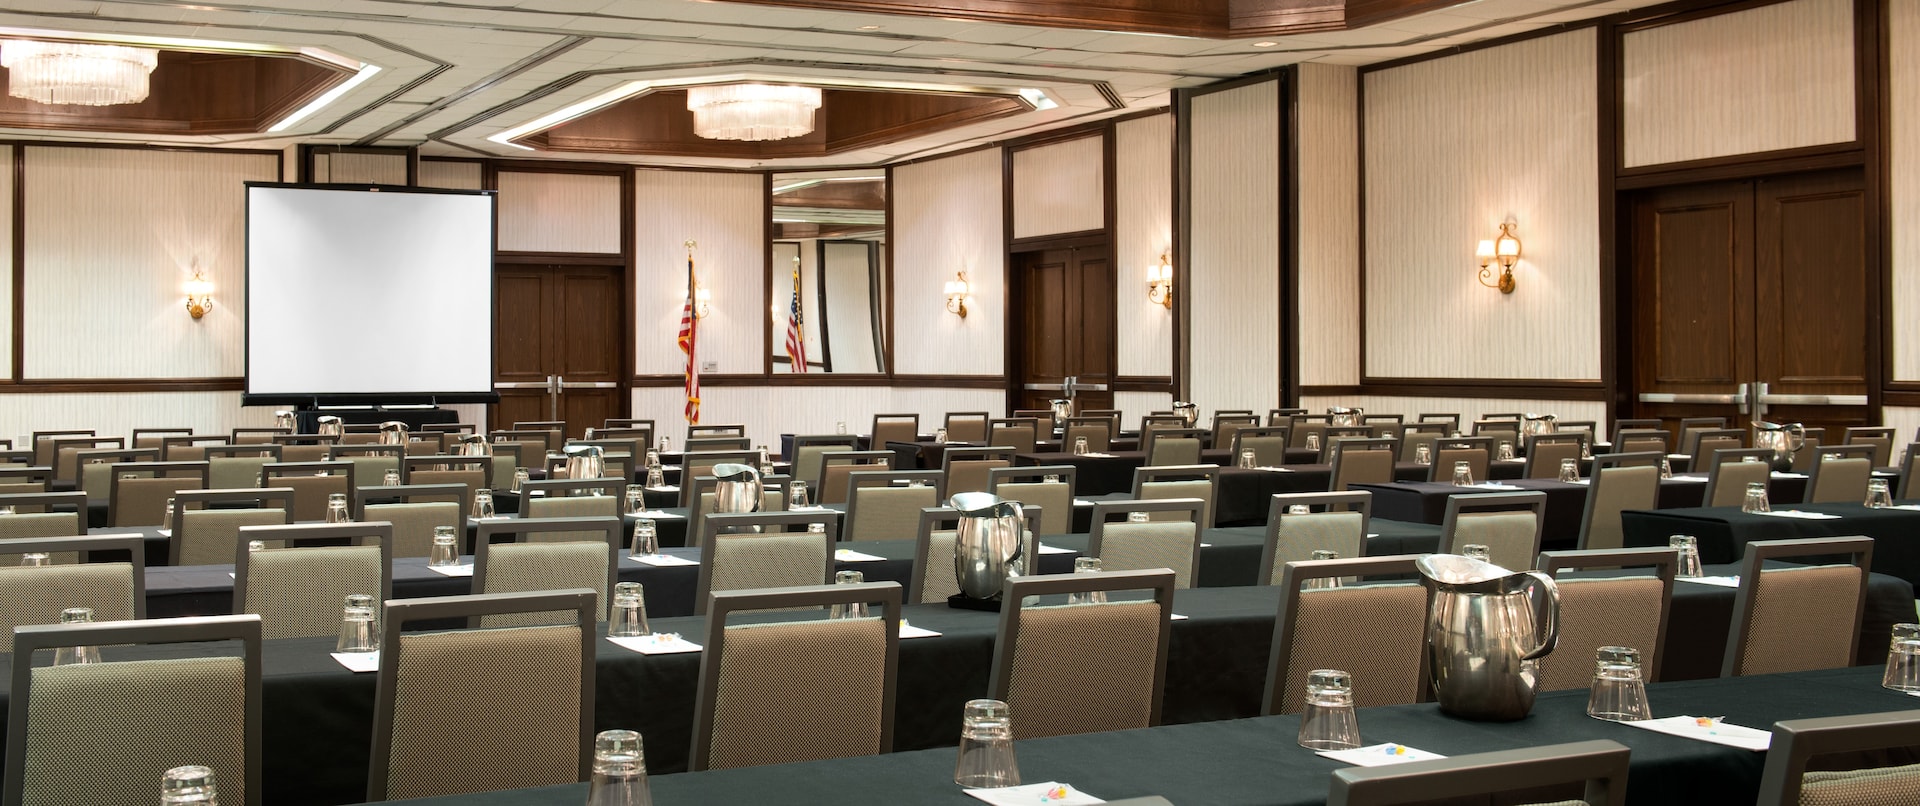 Classroom Setup in Ballroom With Tables and Chairs Facing Presentation Screen and American Flag